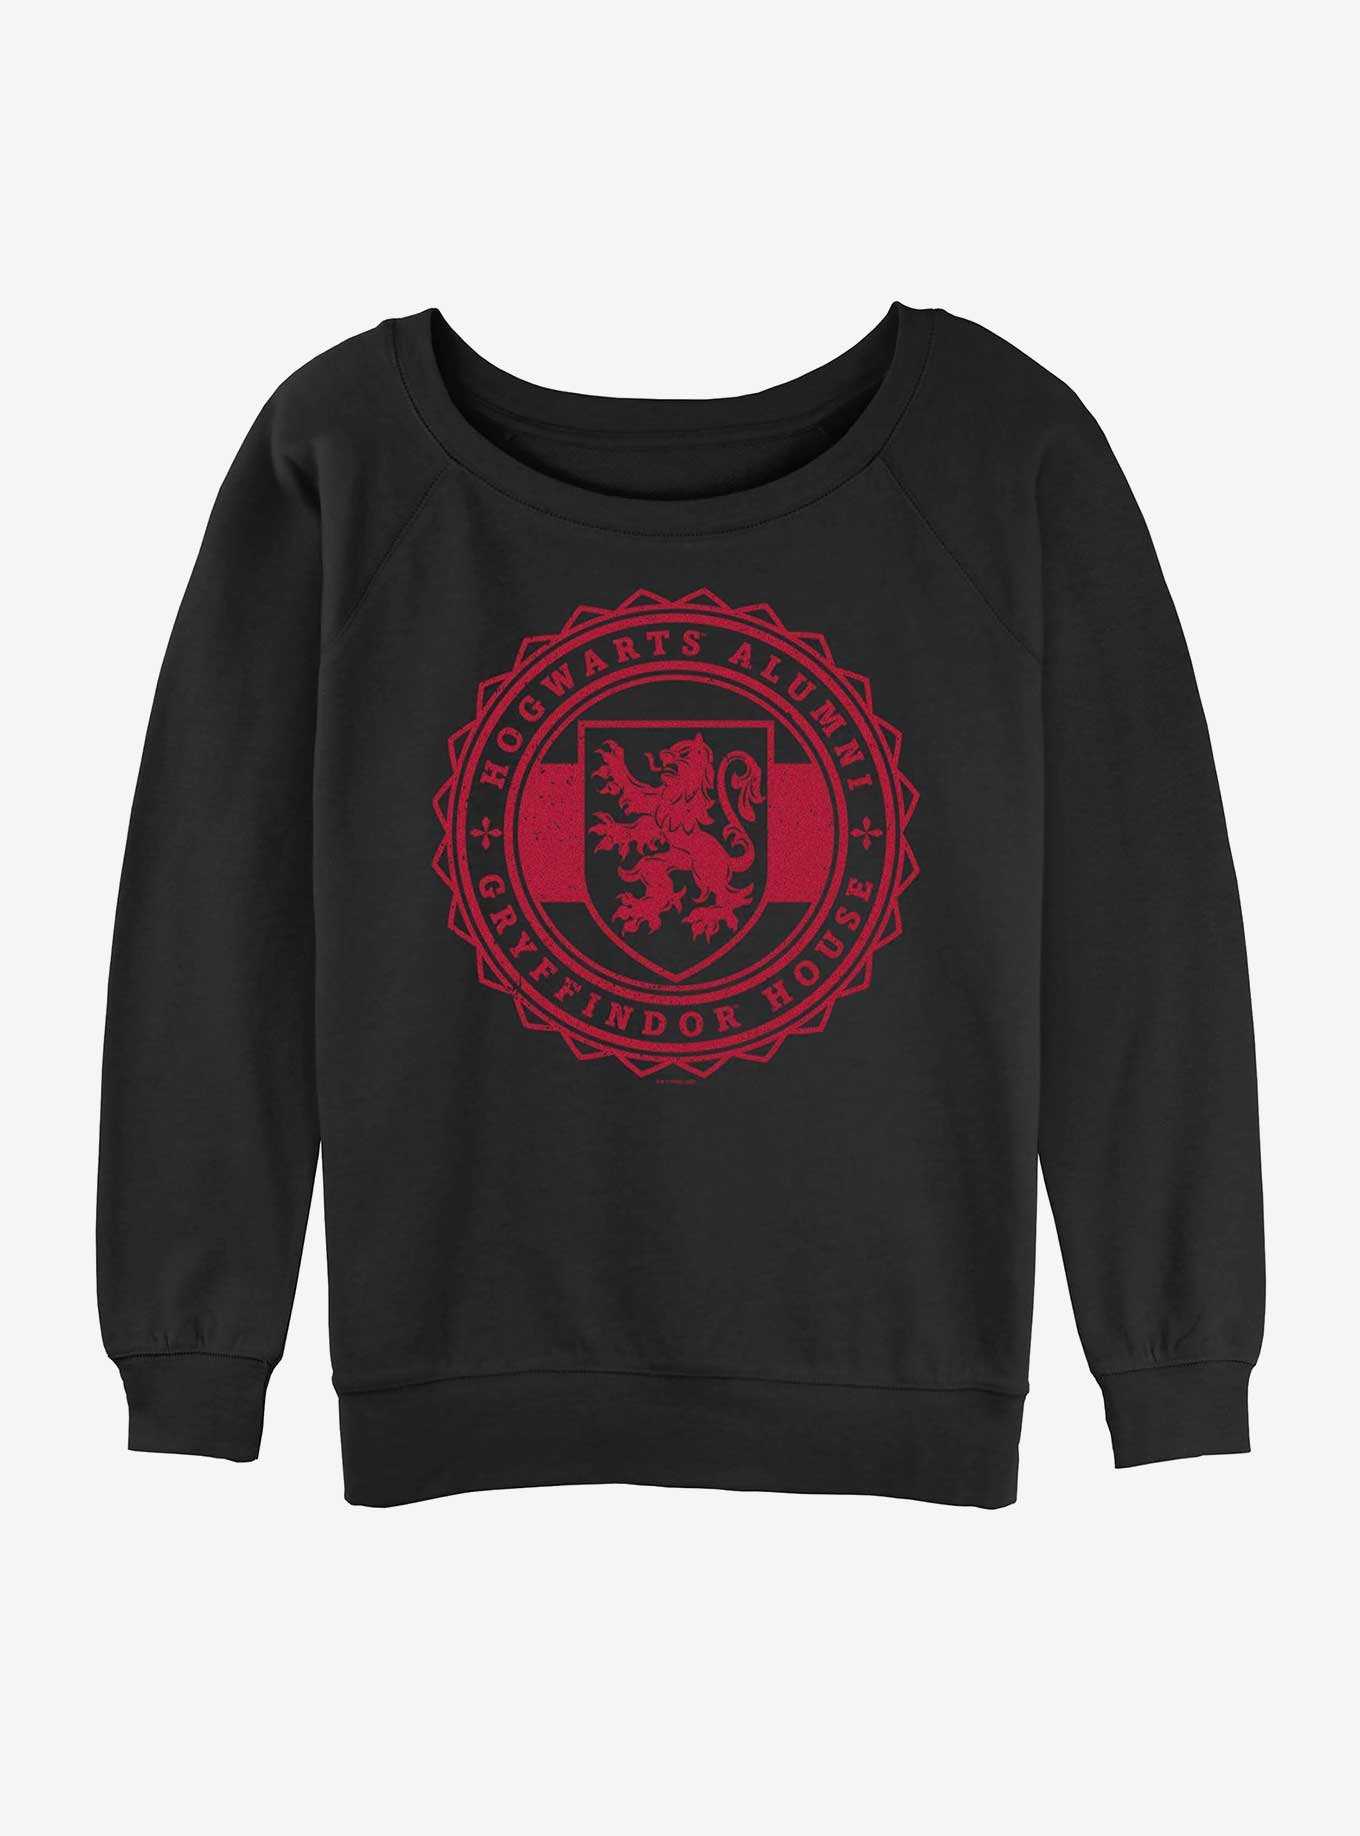 Hot Topic Harry Potter Gryffindor House Saying Hoodie